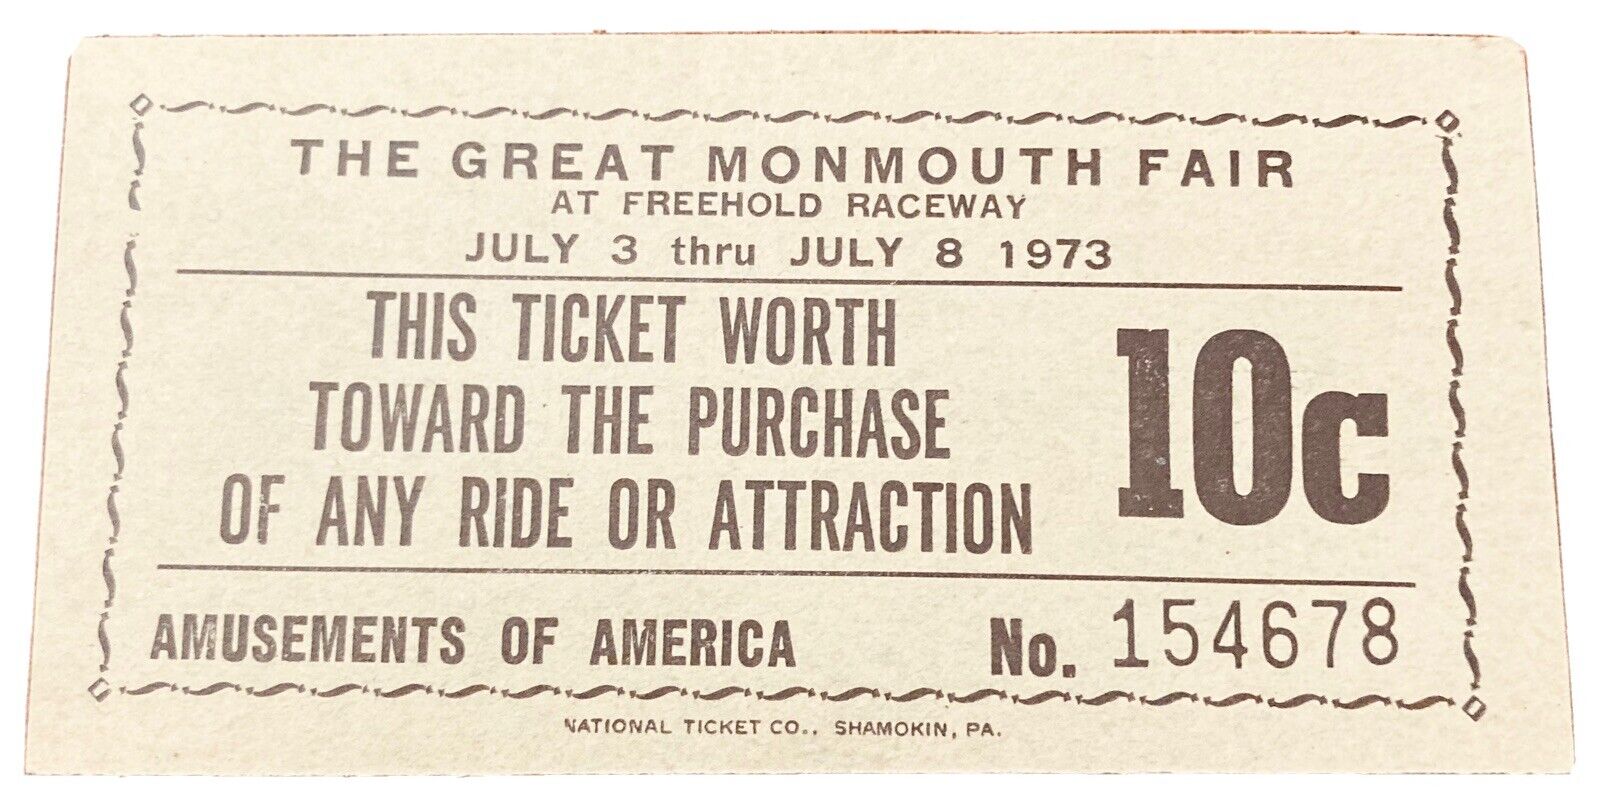 The Great Monmouth Fair 1973 Ticket Coupon Freehold Raceway, NJ